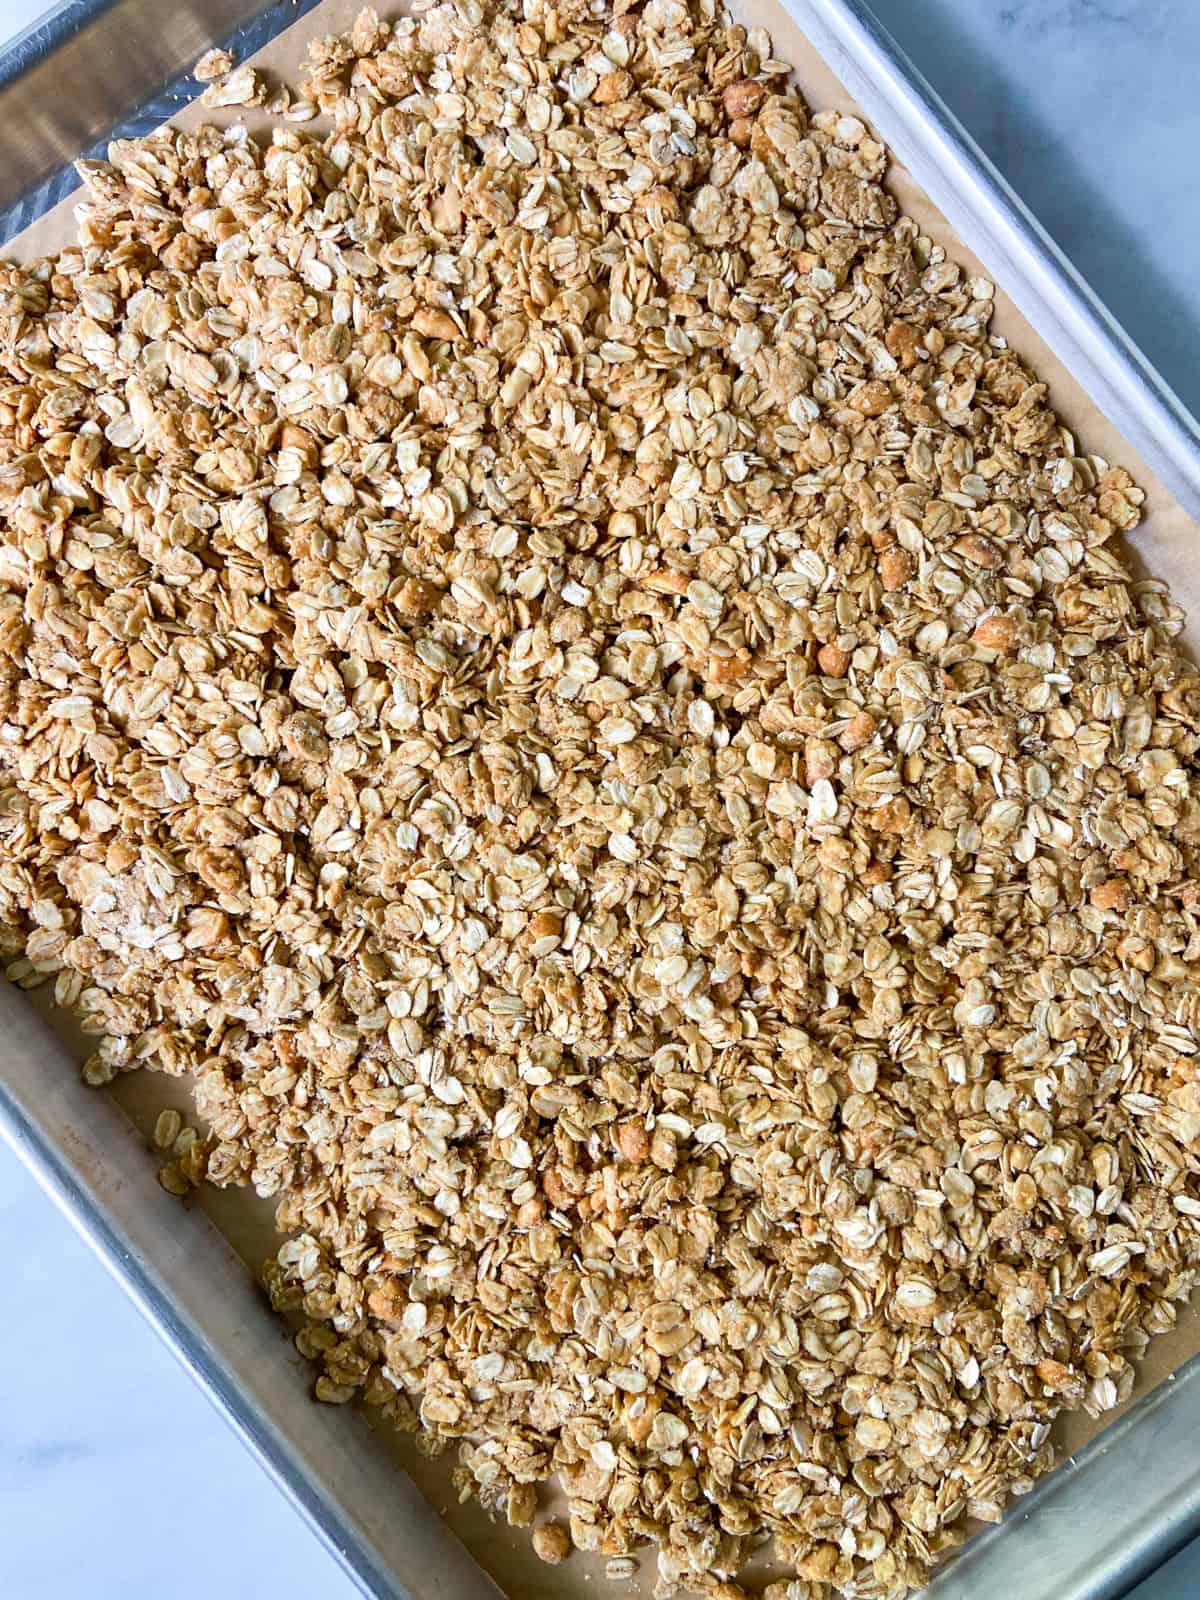 A tray of unbaked peanut butter granola.